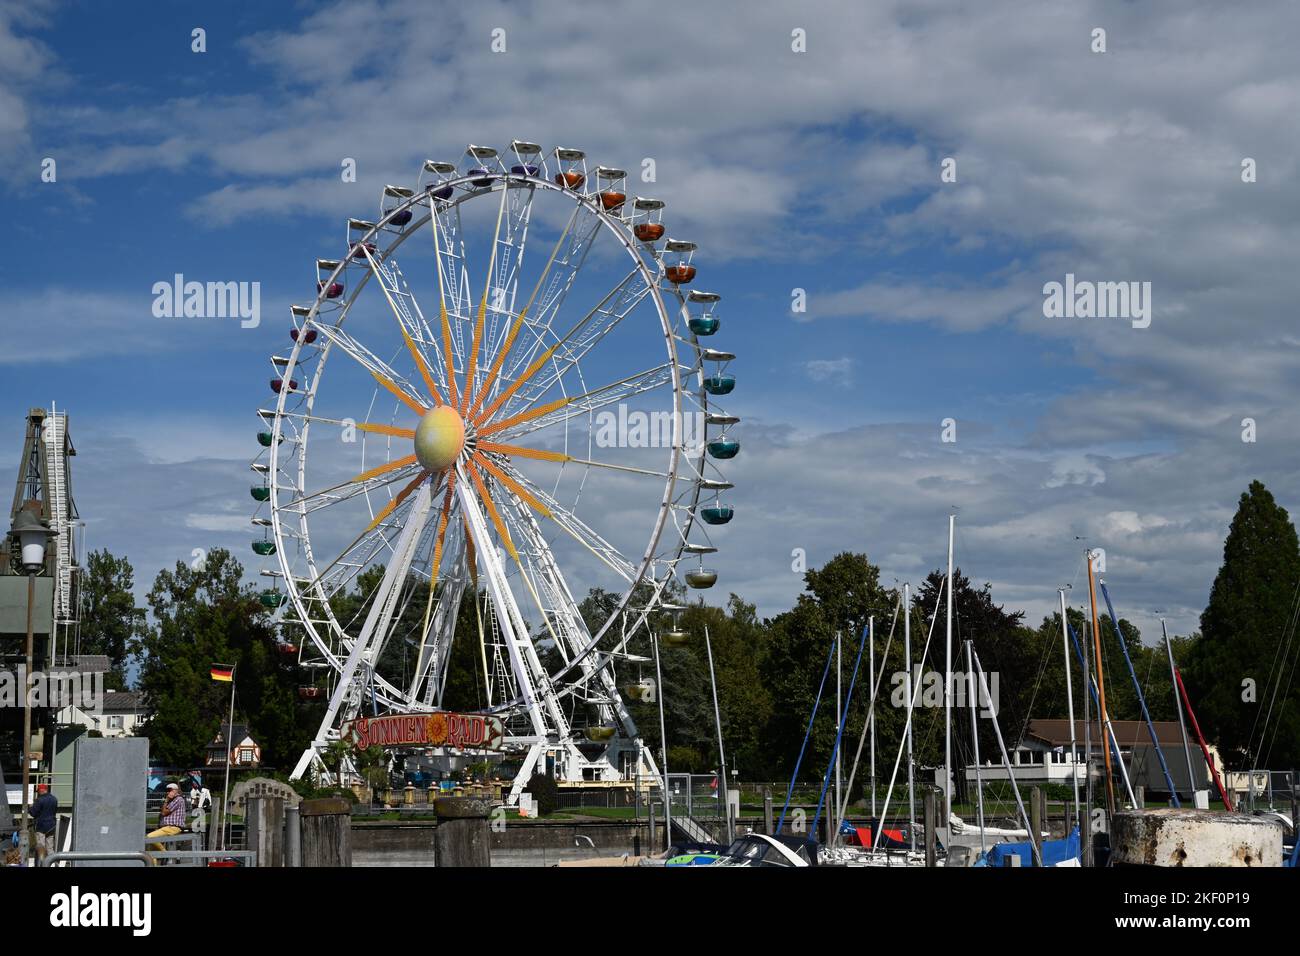 Ferris wheel situated in marina of Friedrichshafen. In foreground are anchored boats and yachts. Stock Photo